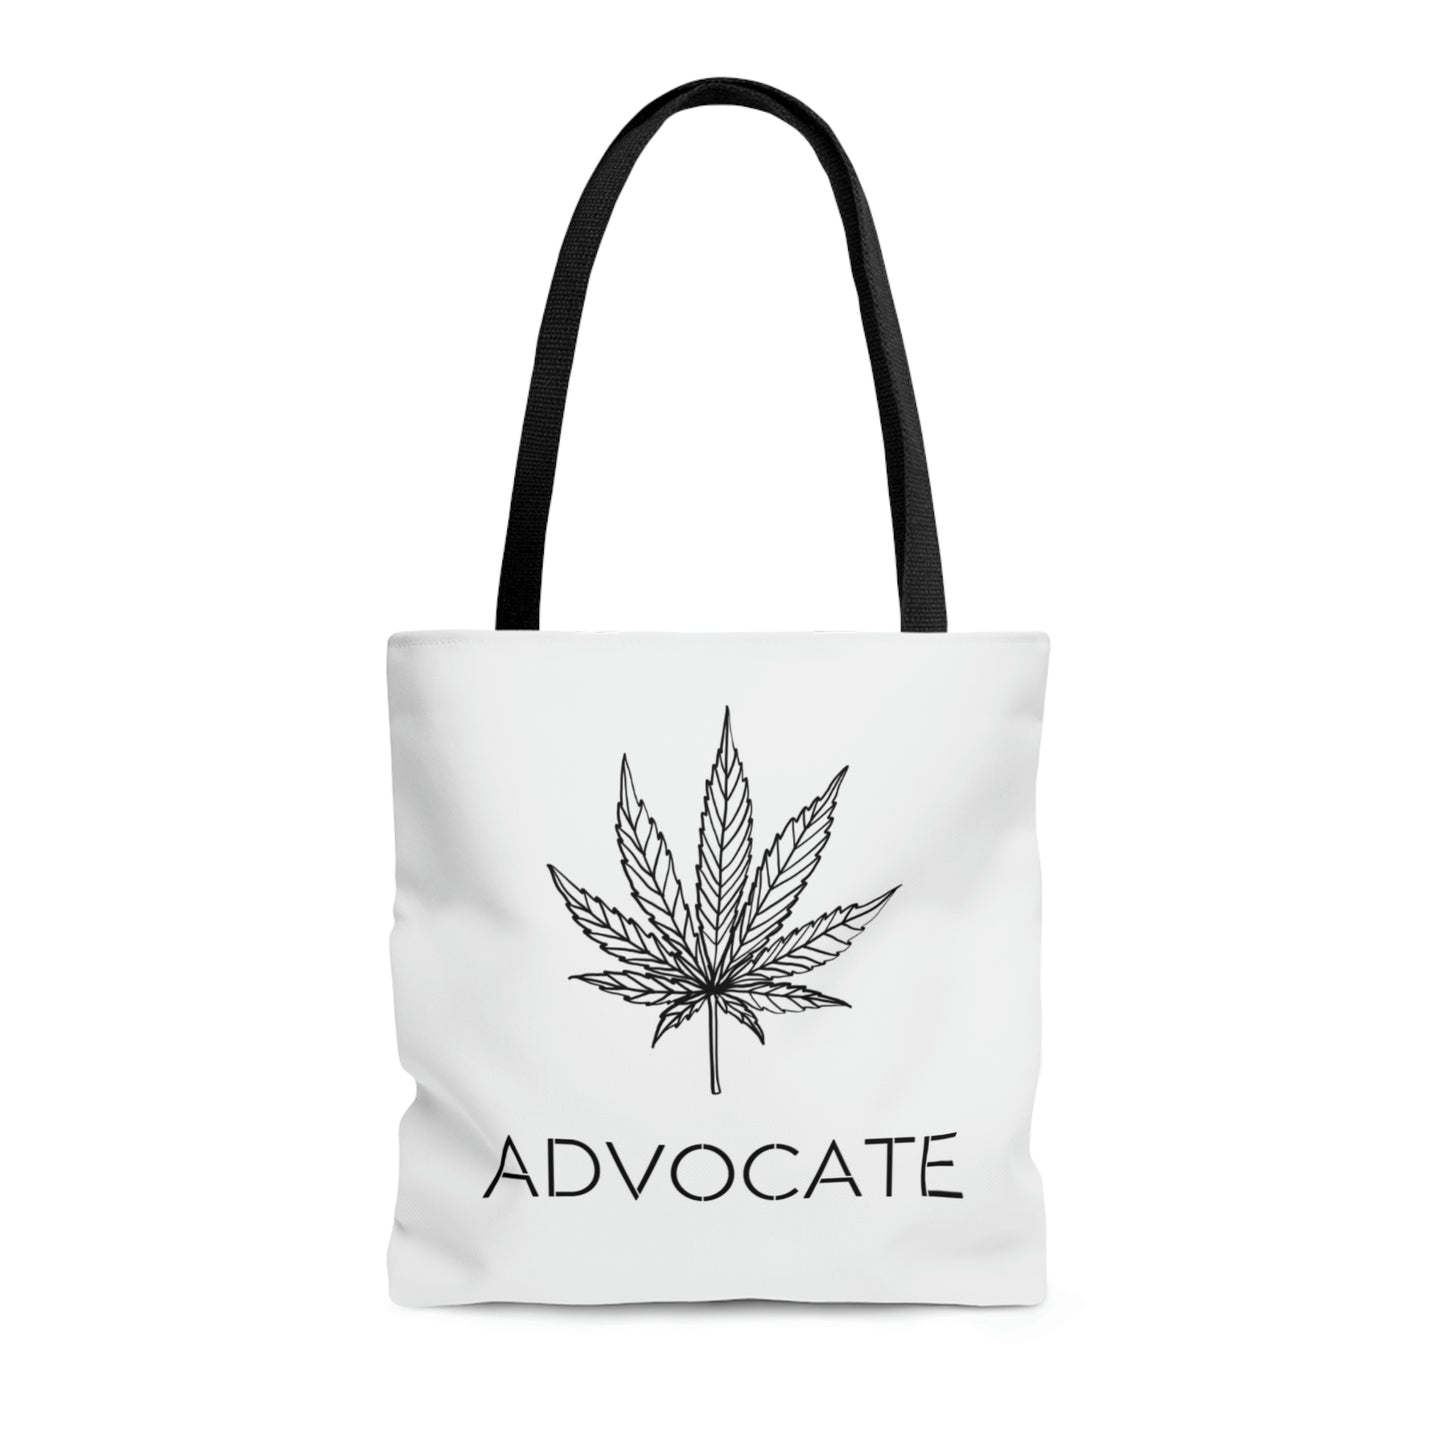 A delicate white Marijuana Tote Bag designed specifically for the advocate in you!